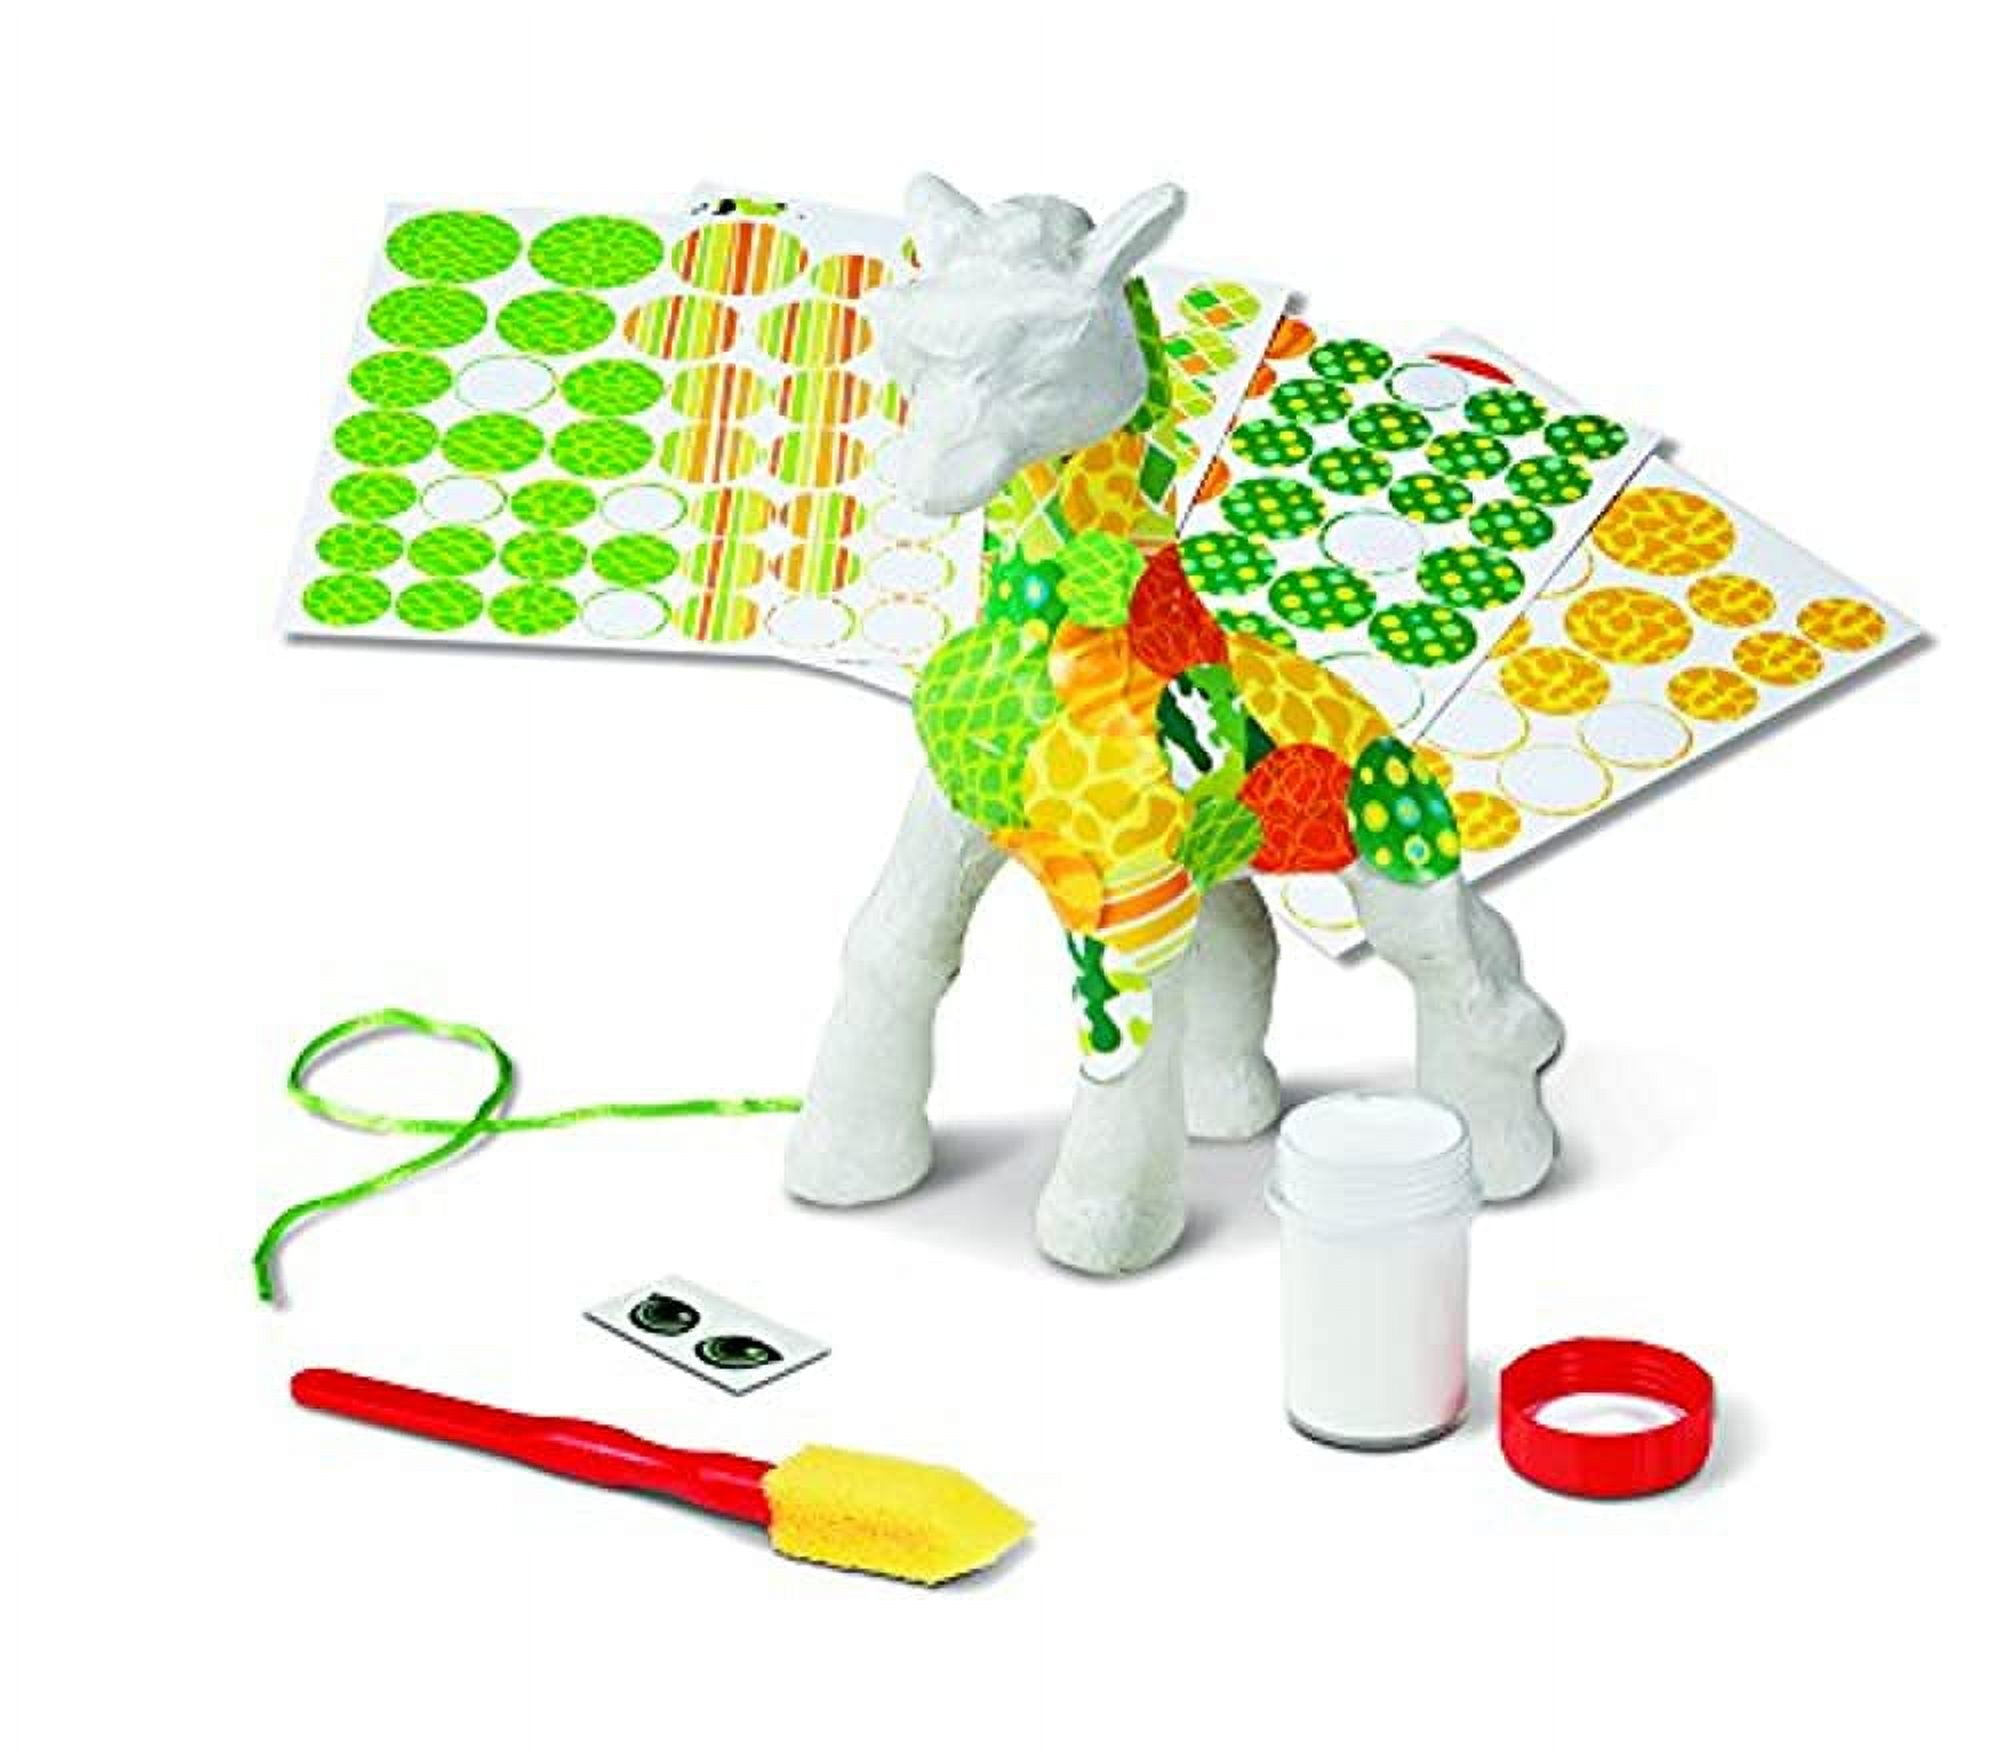  Bright Stripes Decoupage Animal Craft Kit, Arts and Crafts for  Kids Ages 8-12, Children's DIY Creativity Set of Porcelain Animal, Tissue  Paper, Glaze, Brush, Instructions, Creative Gifts, Panda